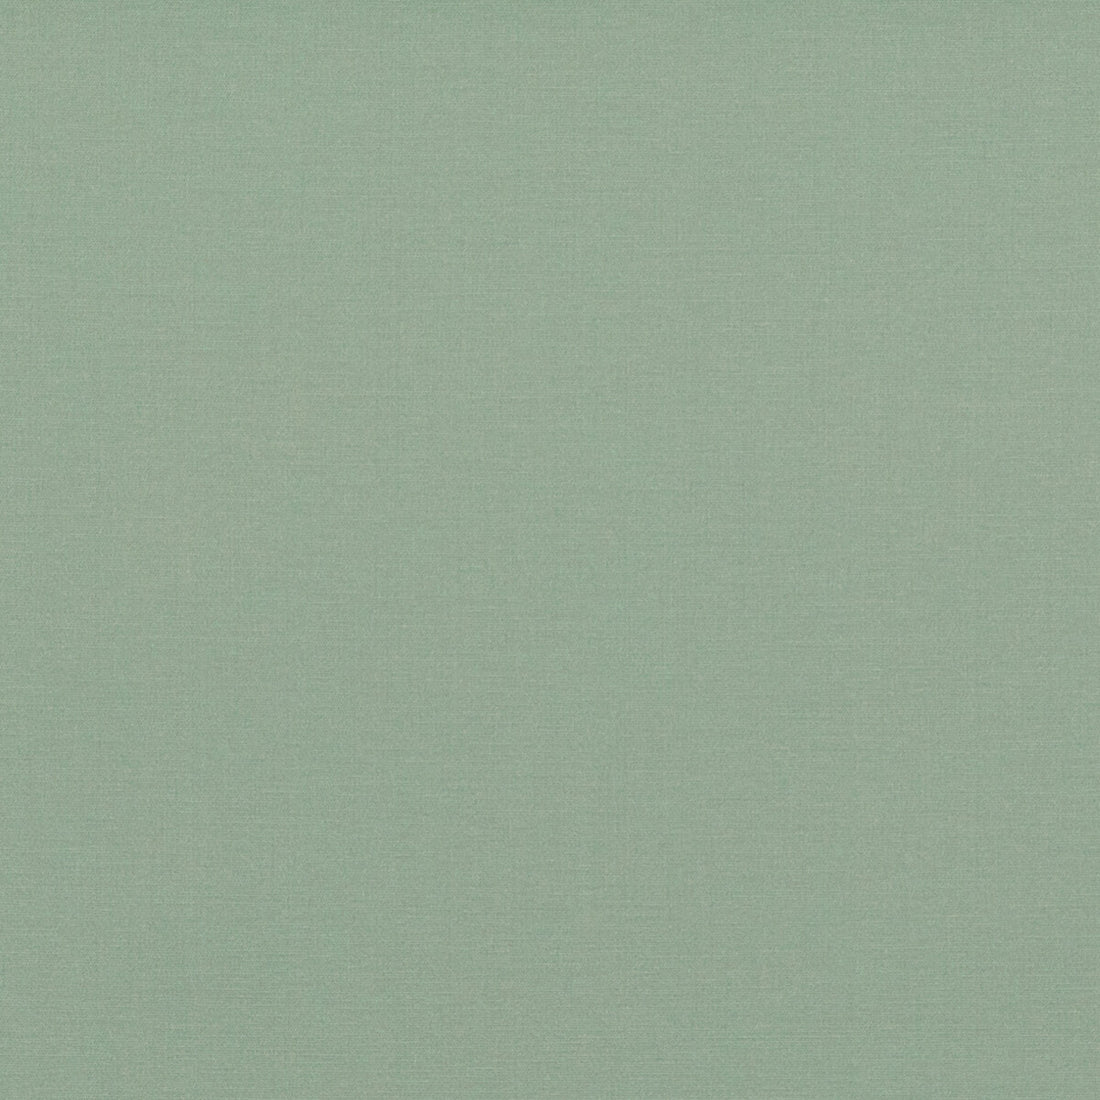 Pavilion fabric in aqua color - pattern PF50478.725.0 - by Baker Lifestyle in the Pavilion - Blegrave Notebook collection